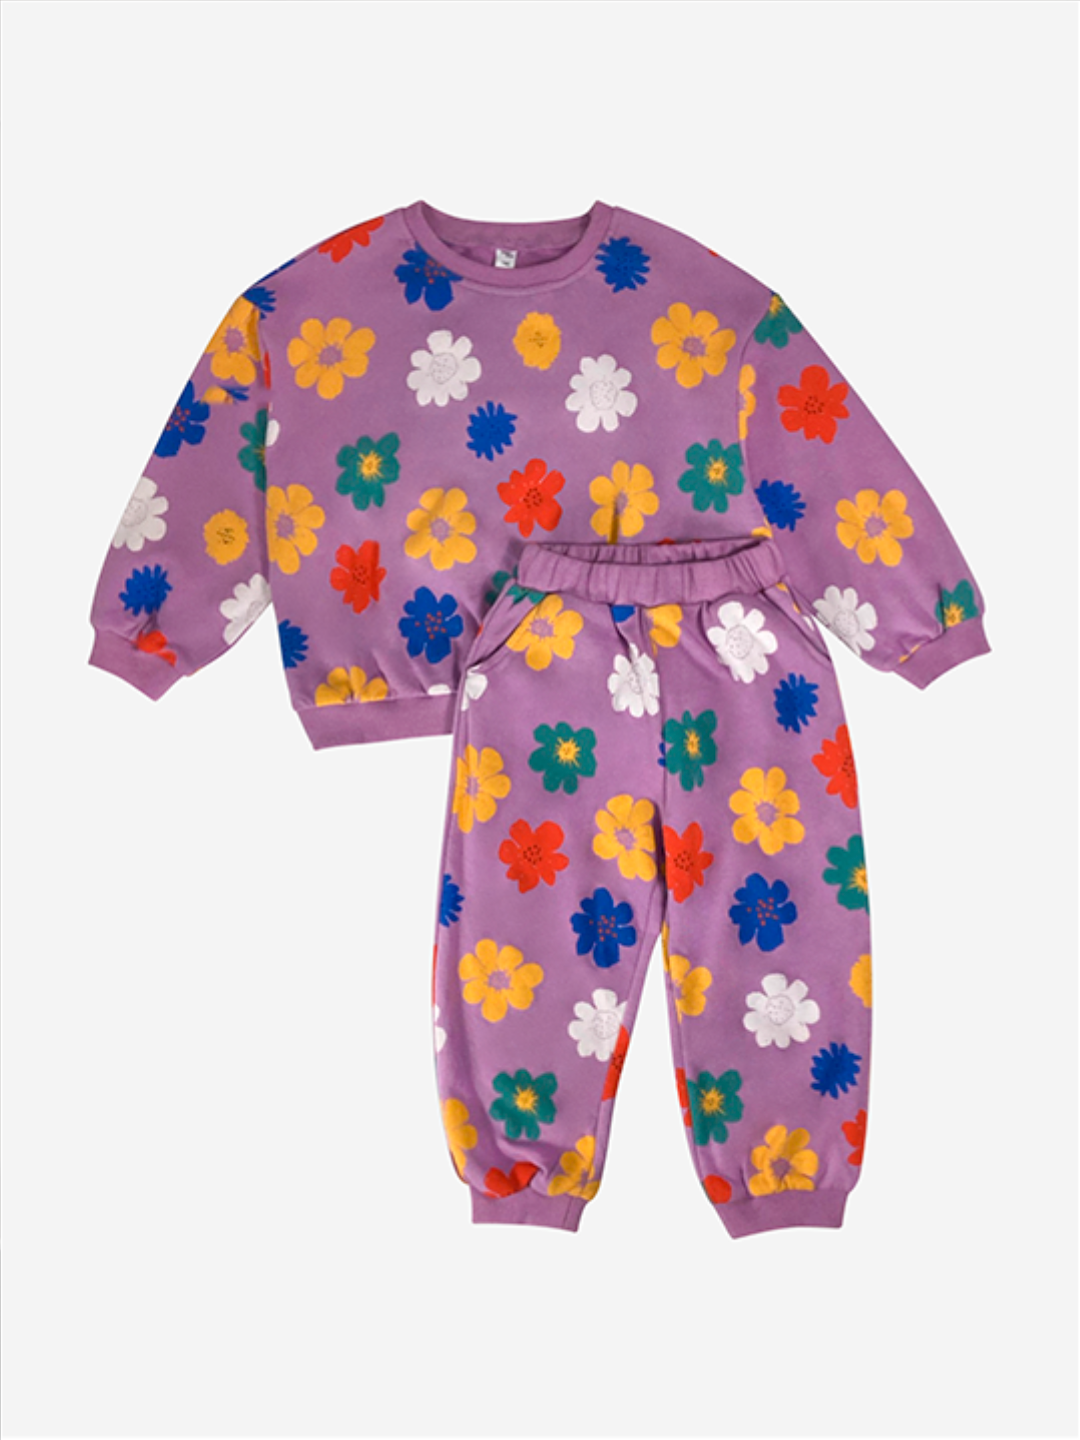 A kids' sweatshirt and pants set in purple with yellow, orange, green, blue and white flowers